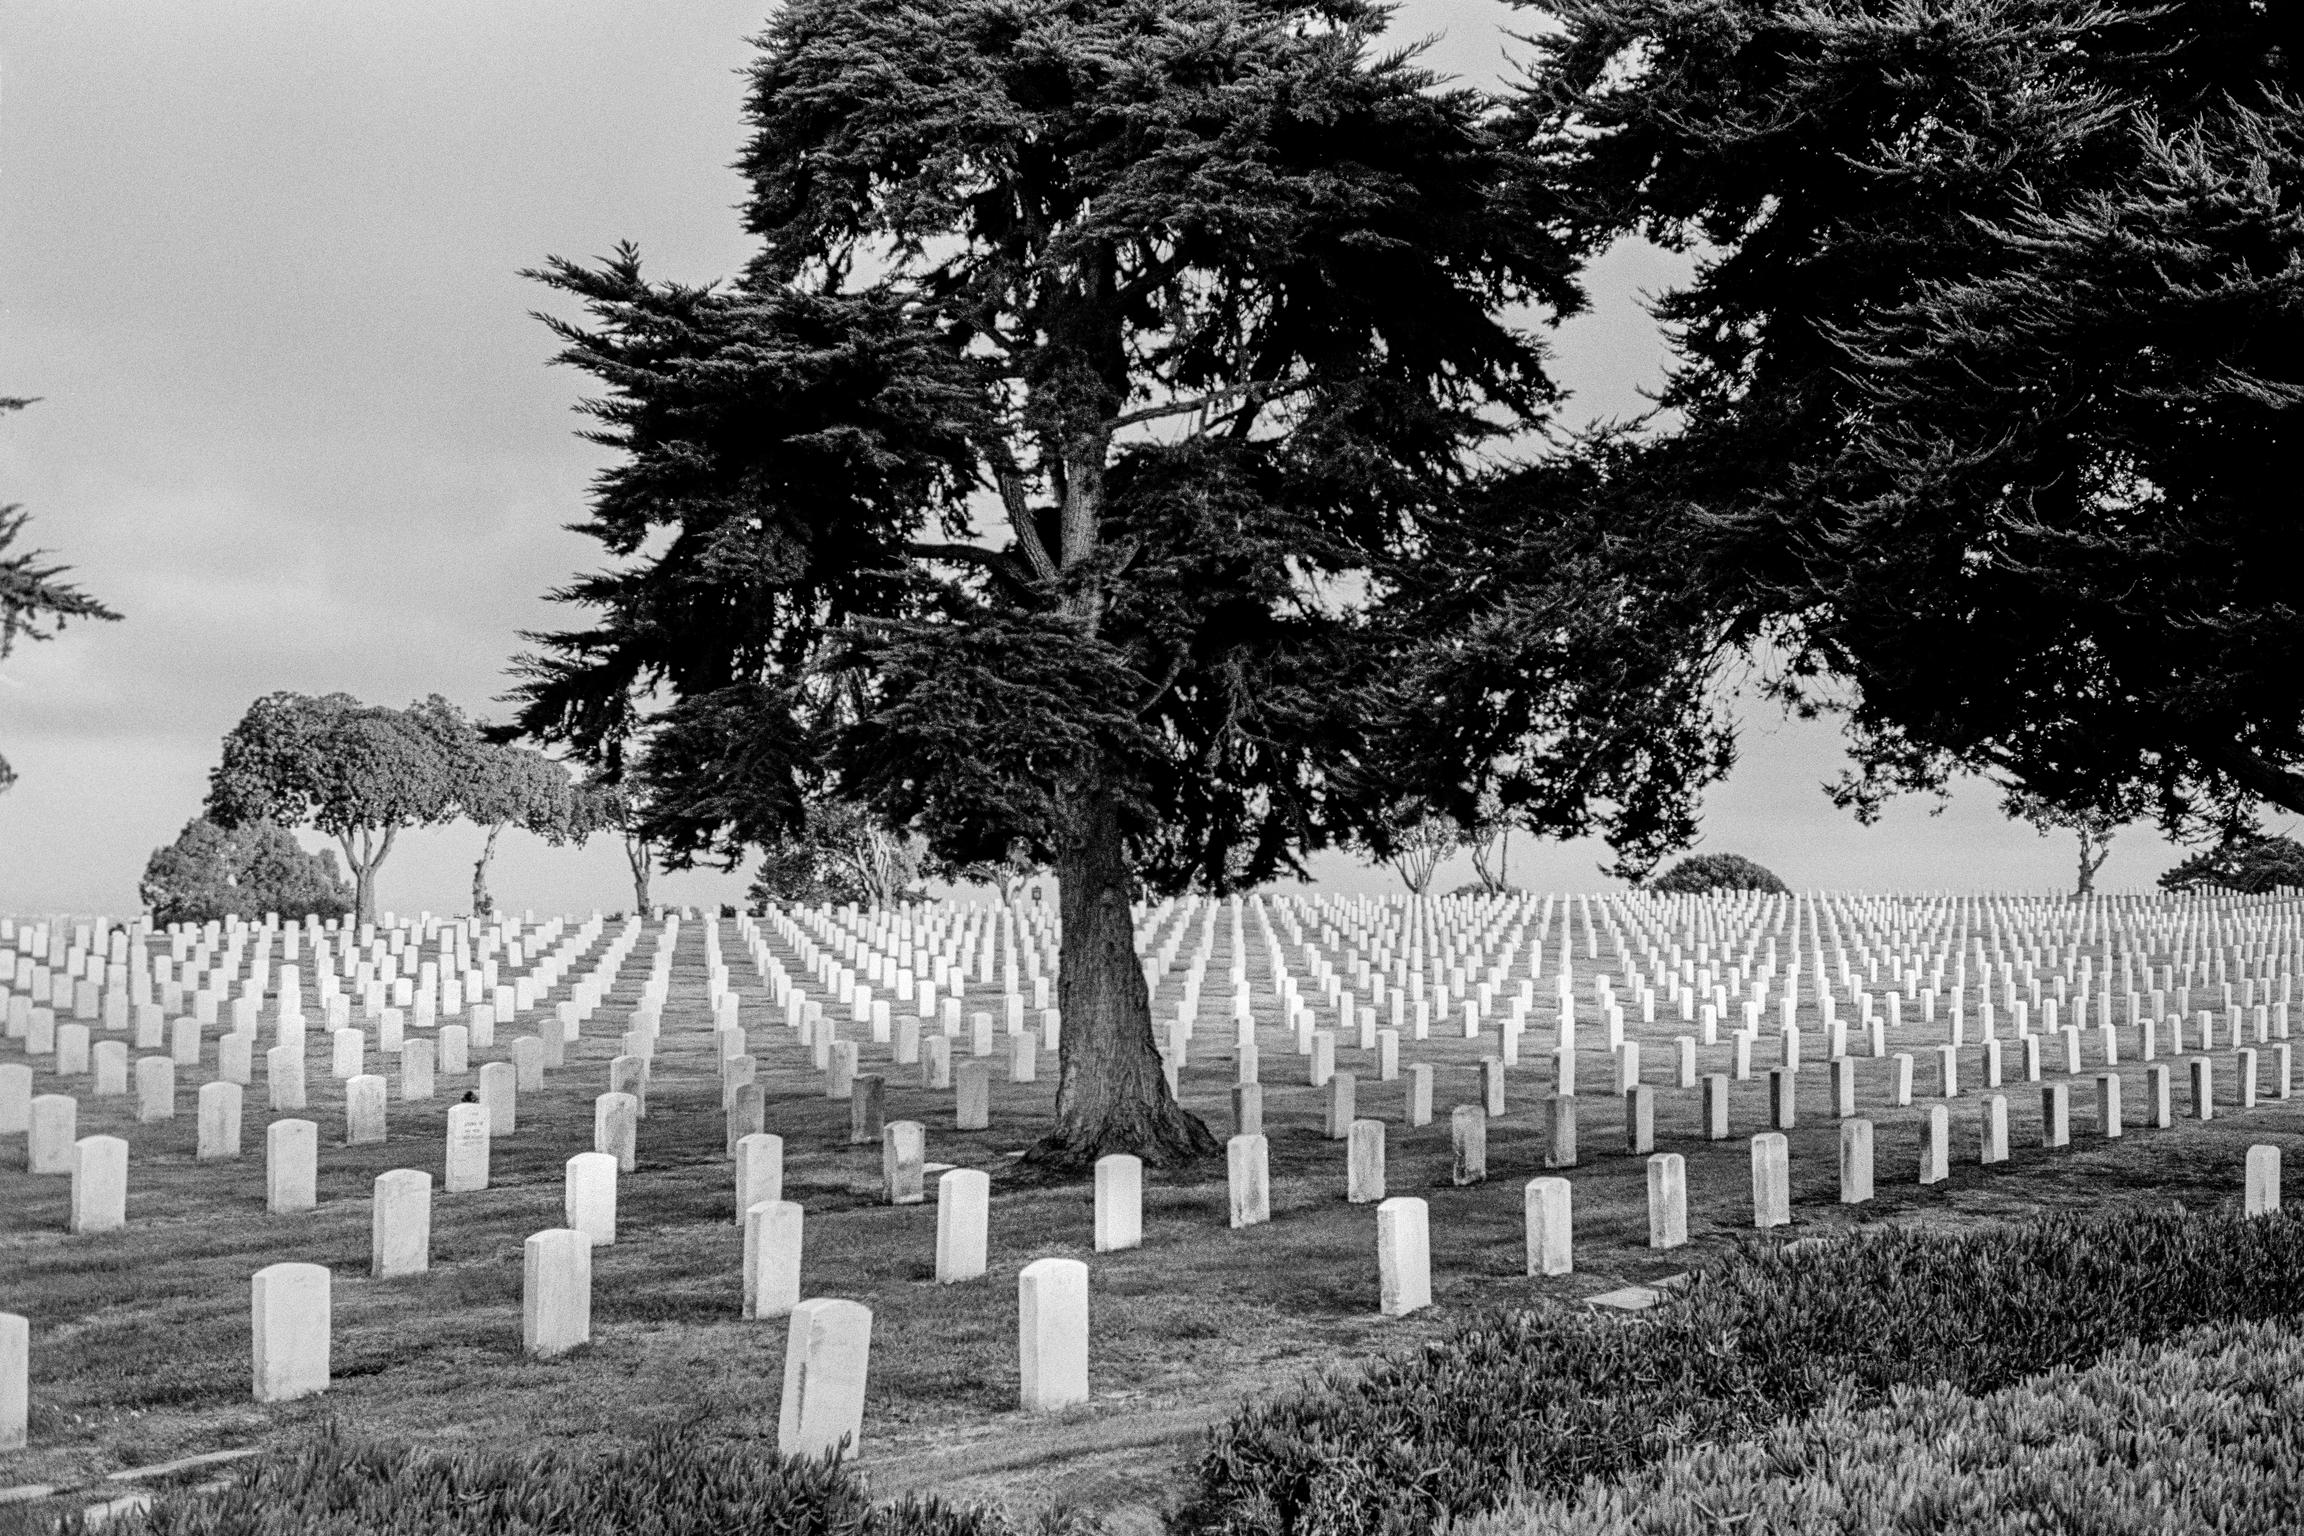 Fort Rosecrans National Cemetery. The federal military cemetery in the edge of the city. San Diego. California, USA